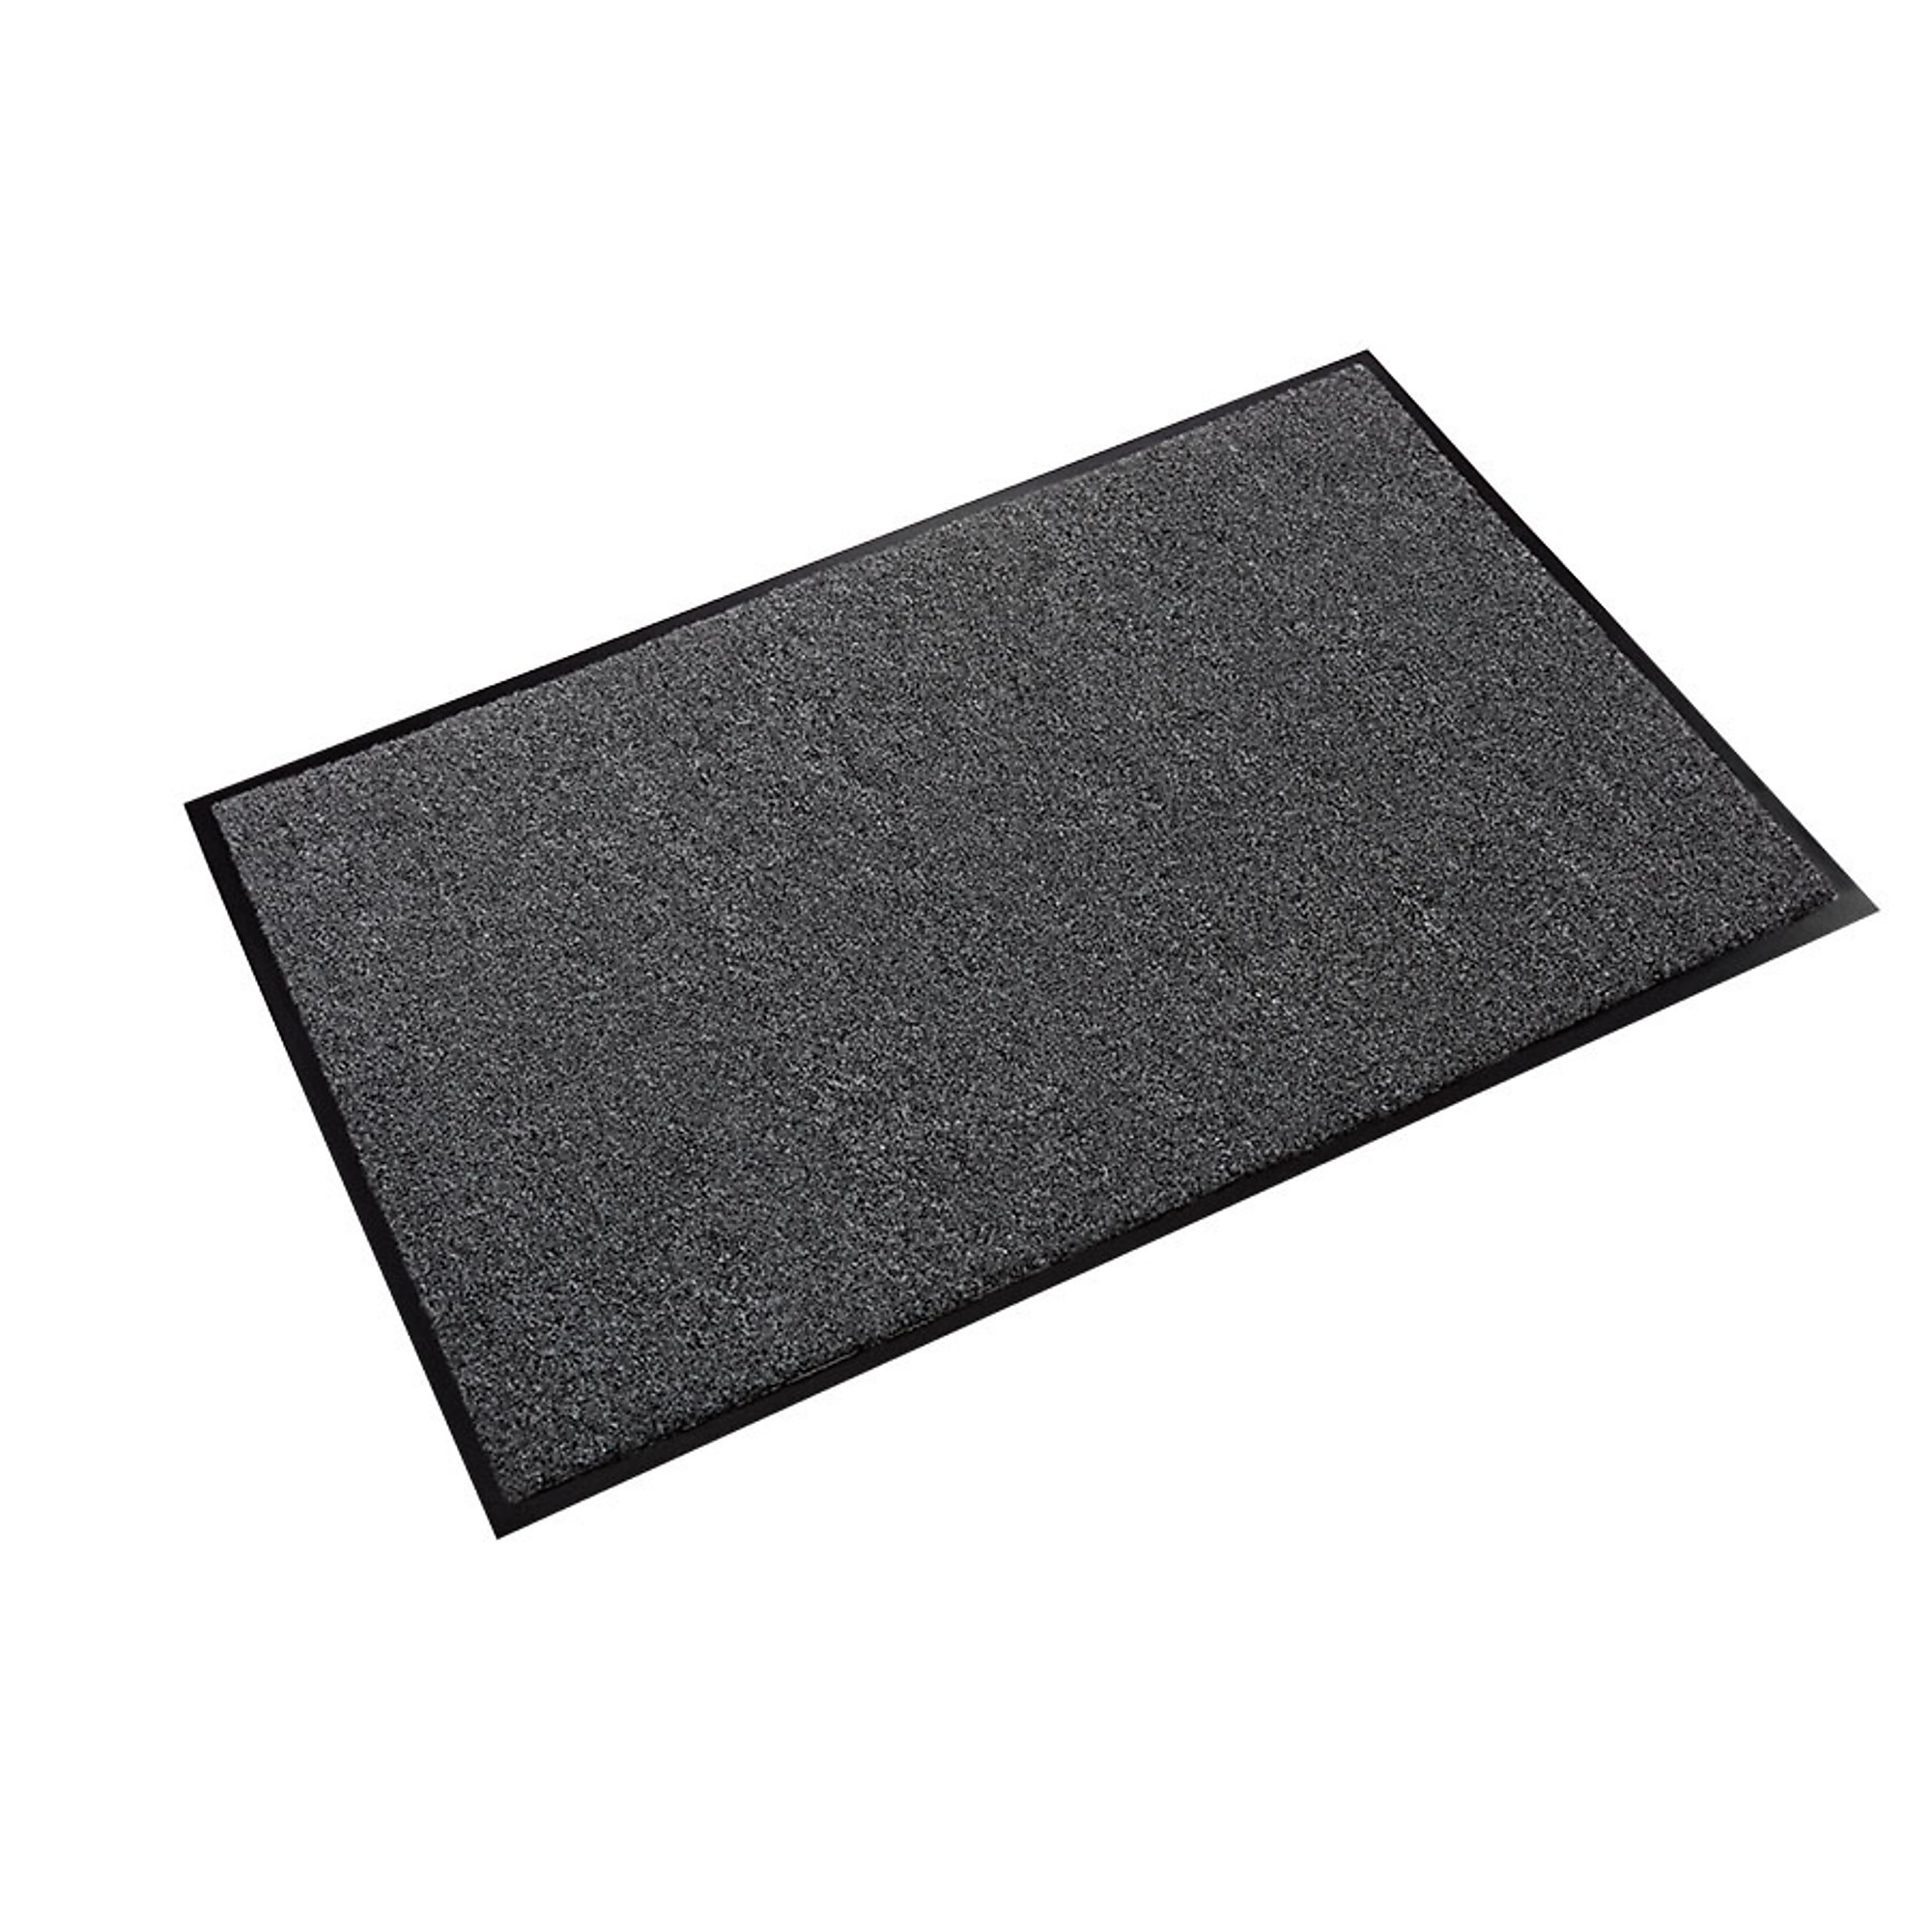 Crown Matting Technologies, Rely-On Olefin 4ft.x10ft. Charcoal, Width 48 in, Length 120 in, Thickness 3/8 in, Model GS 0410CH